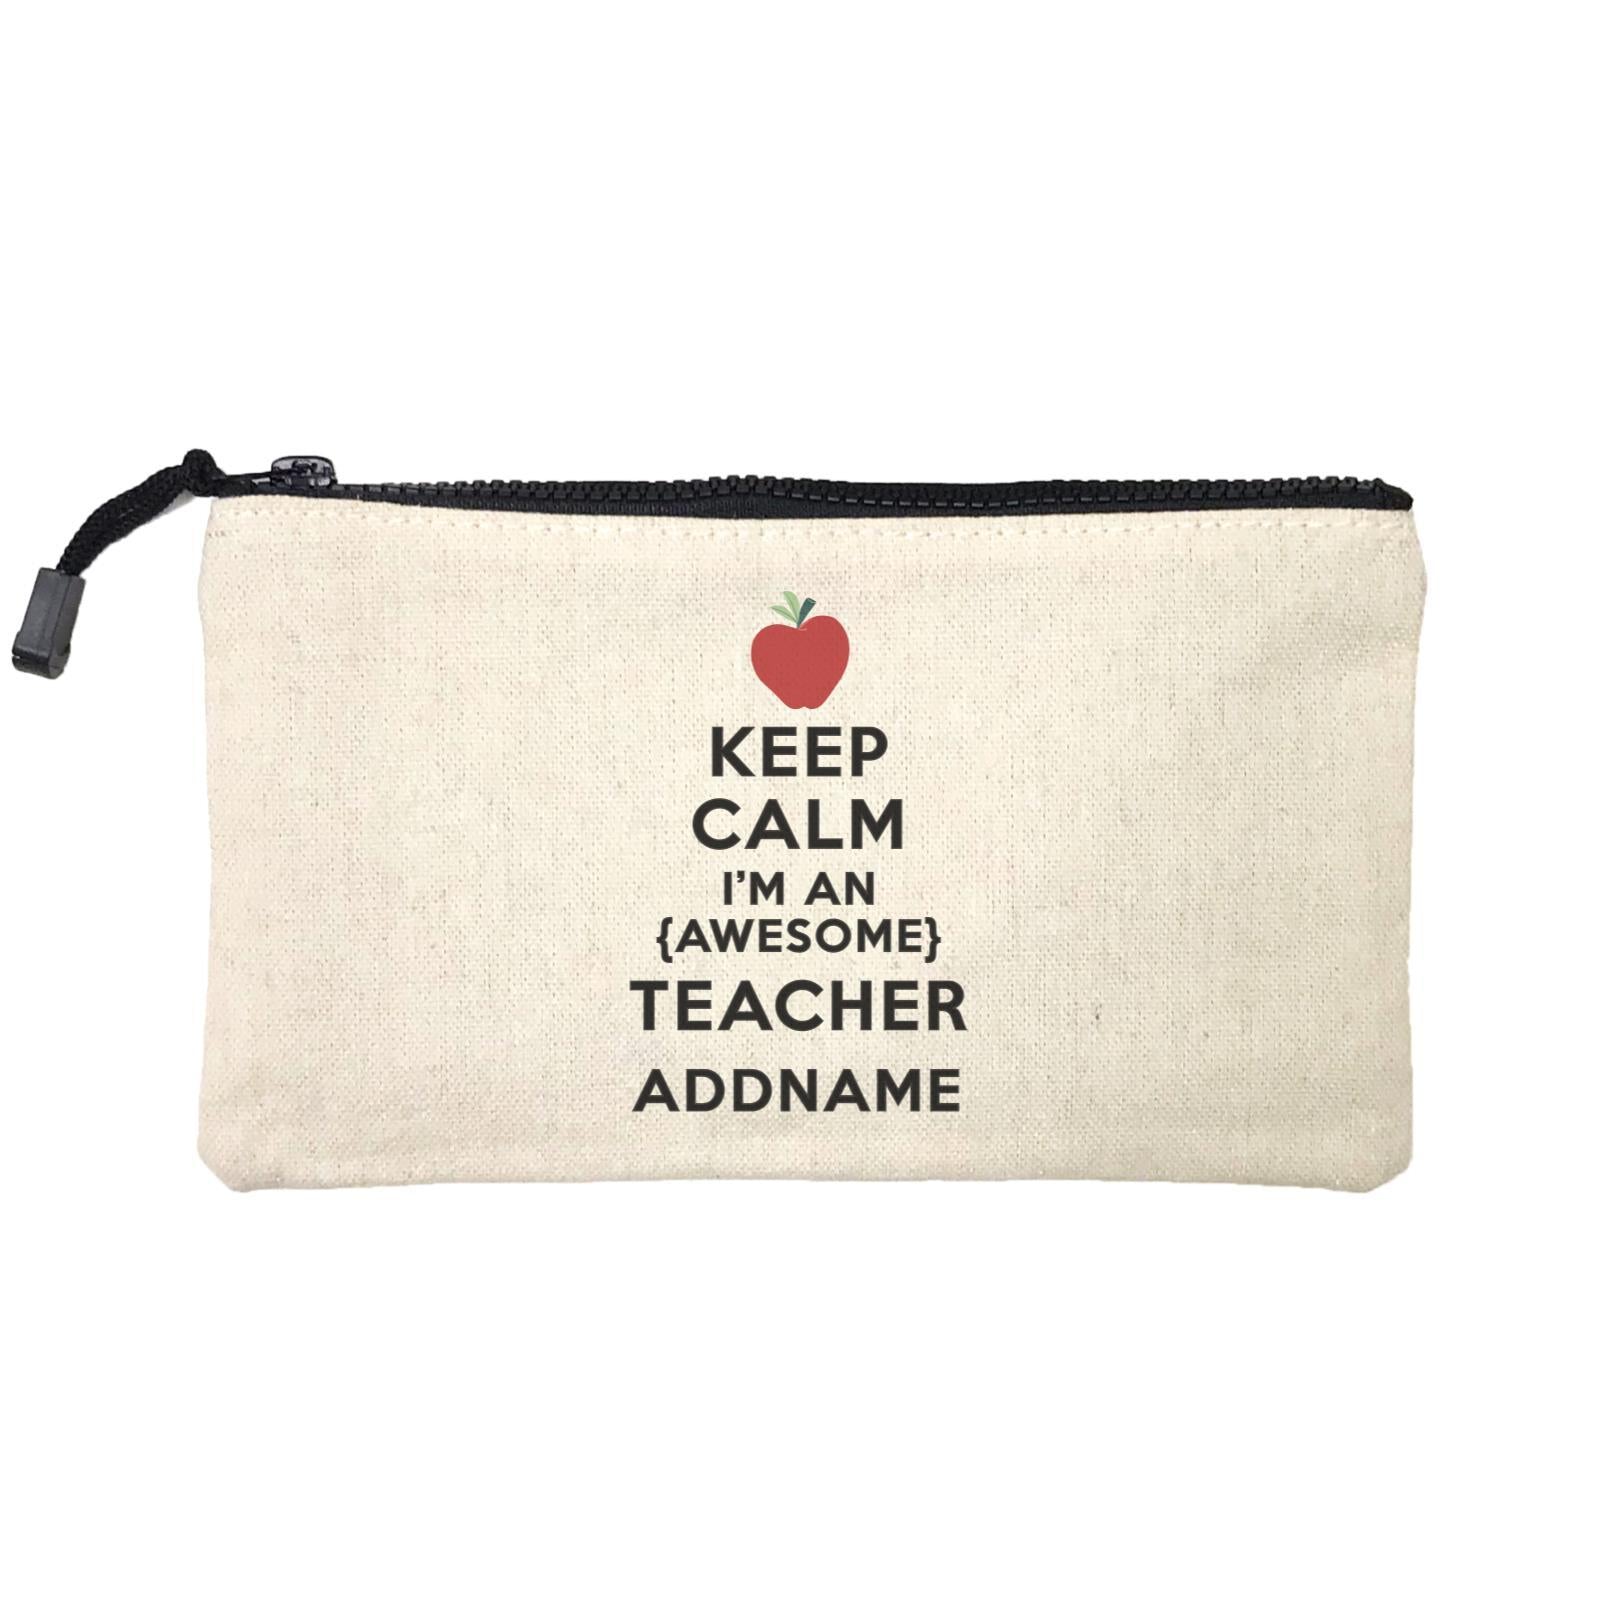 Teacher Quotes Keep Calm I'm An Awesome Teacher Addname Mini Accessories Stationery Pouch